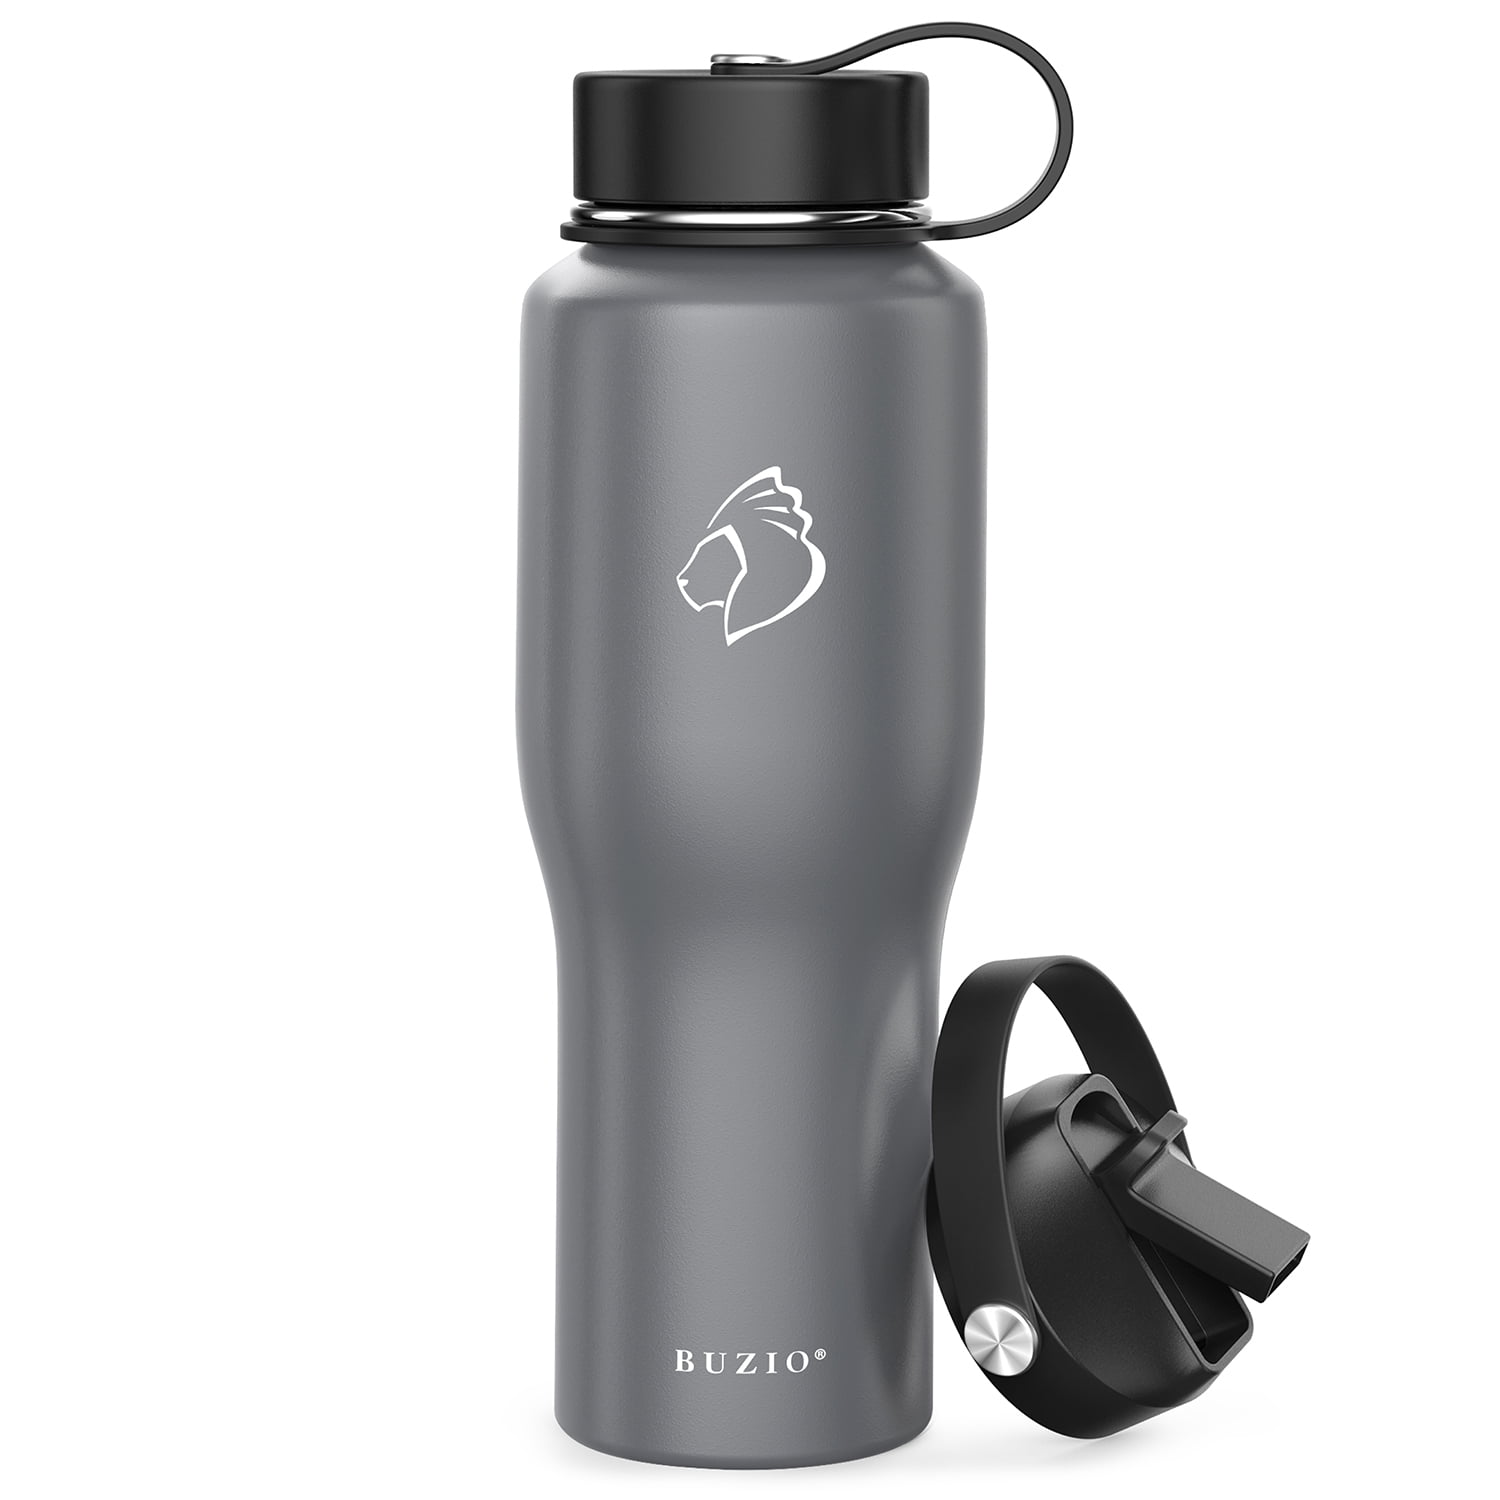 BUZIO Insulated Water Bottles 32 oz, Stainless Steel Water Bottle Fit in  Any Car Cup Holder, Gray 